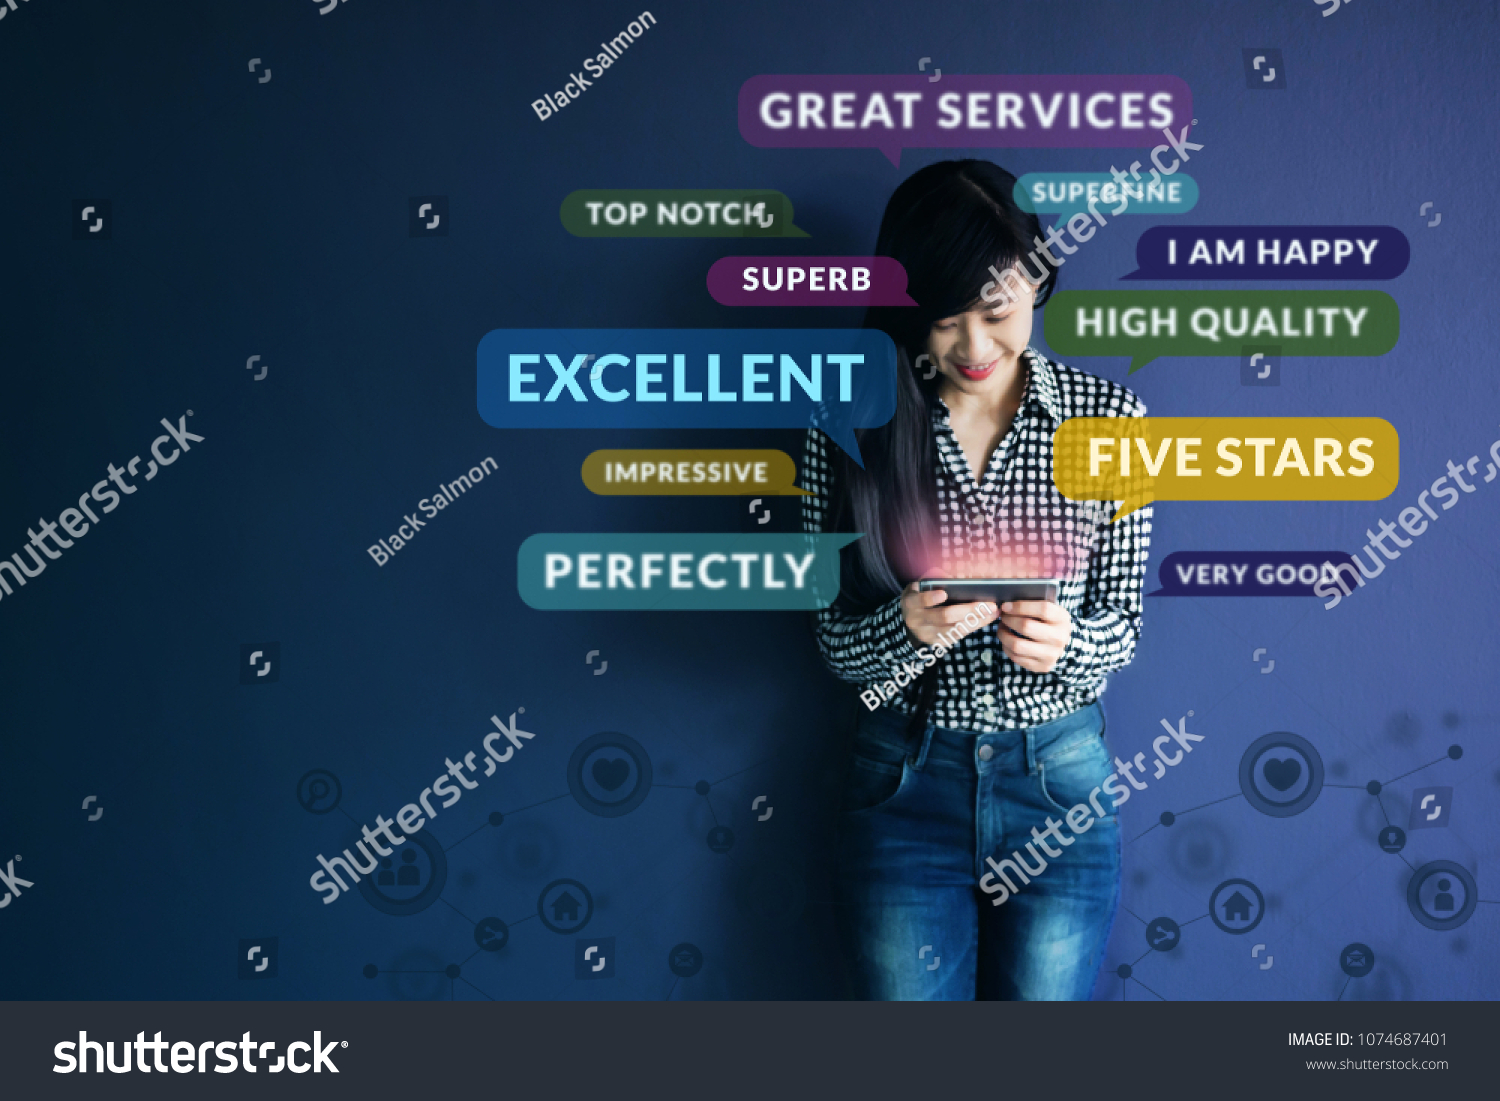 Customer Experience Concept. Soft focus of Happy Client standing at the Wall, Smiling while using Smartphone. Surrounded by Positive Review in Speech Bubble and Social Network icons #1074687401